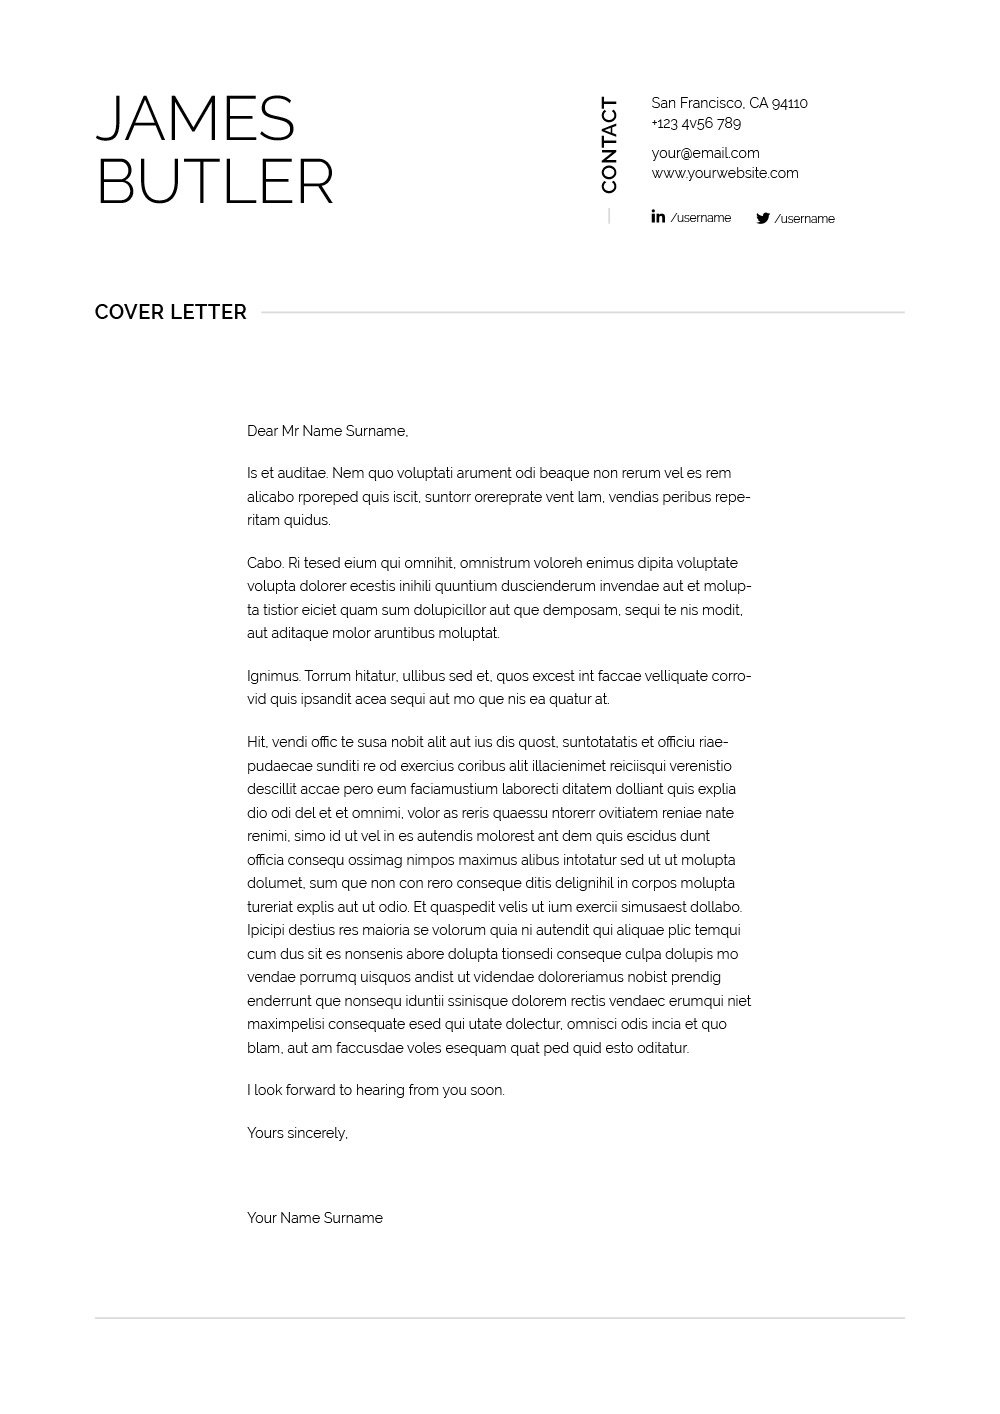 james cover letter 873